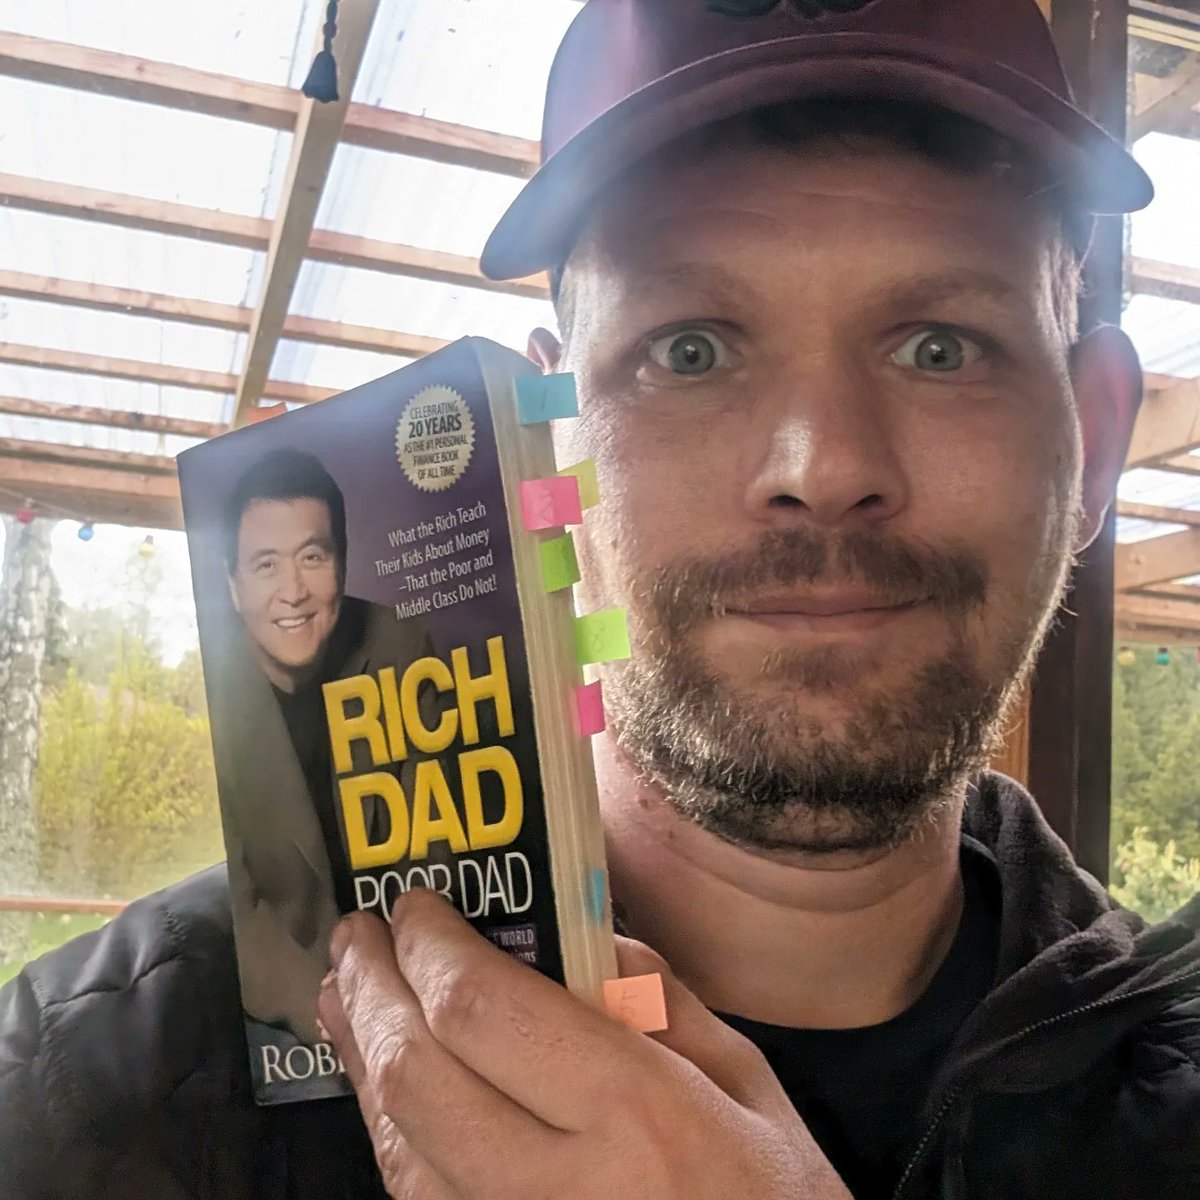 Who is your favorite? Poor dad Robert og rich dad Keith?
Personally i prefer the road less stupid, but it is a hard road to take 🥳😆
#richdad #poordad #richdadpoordad